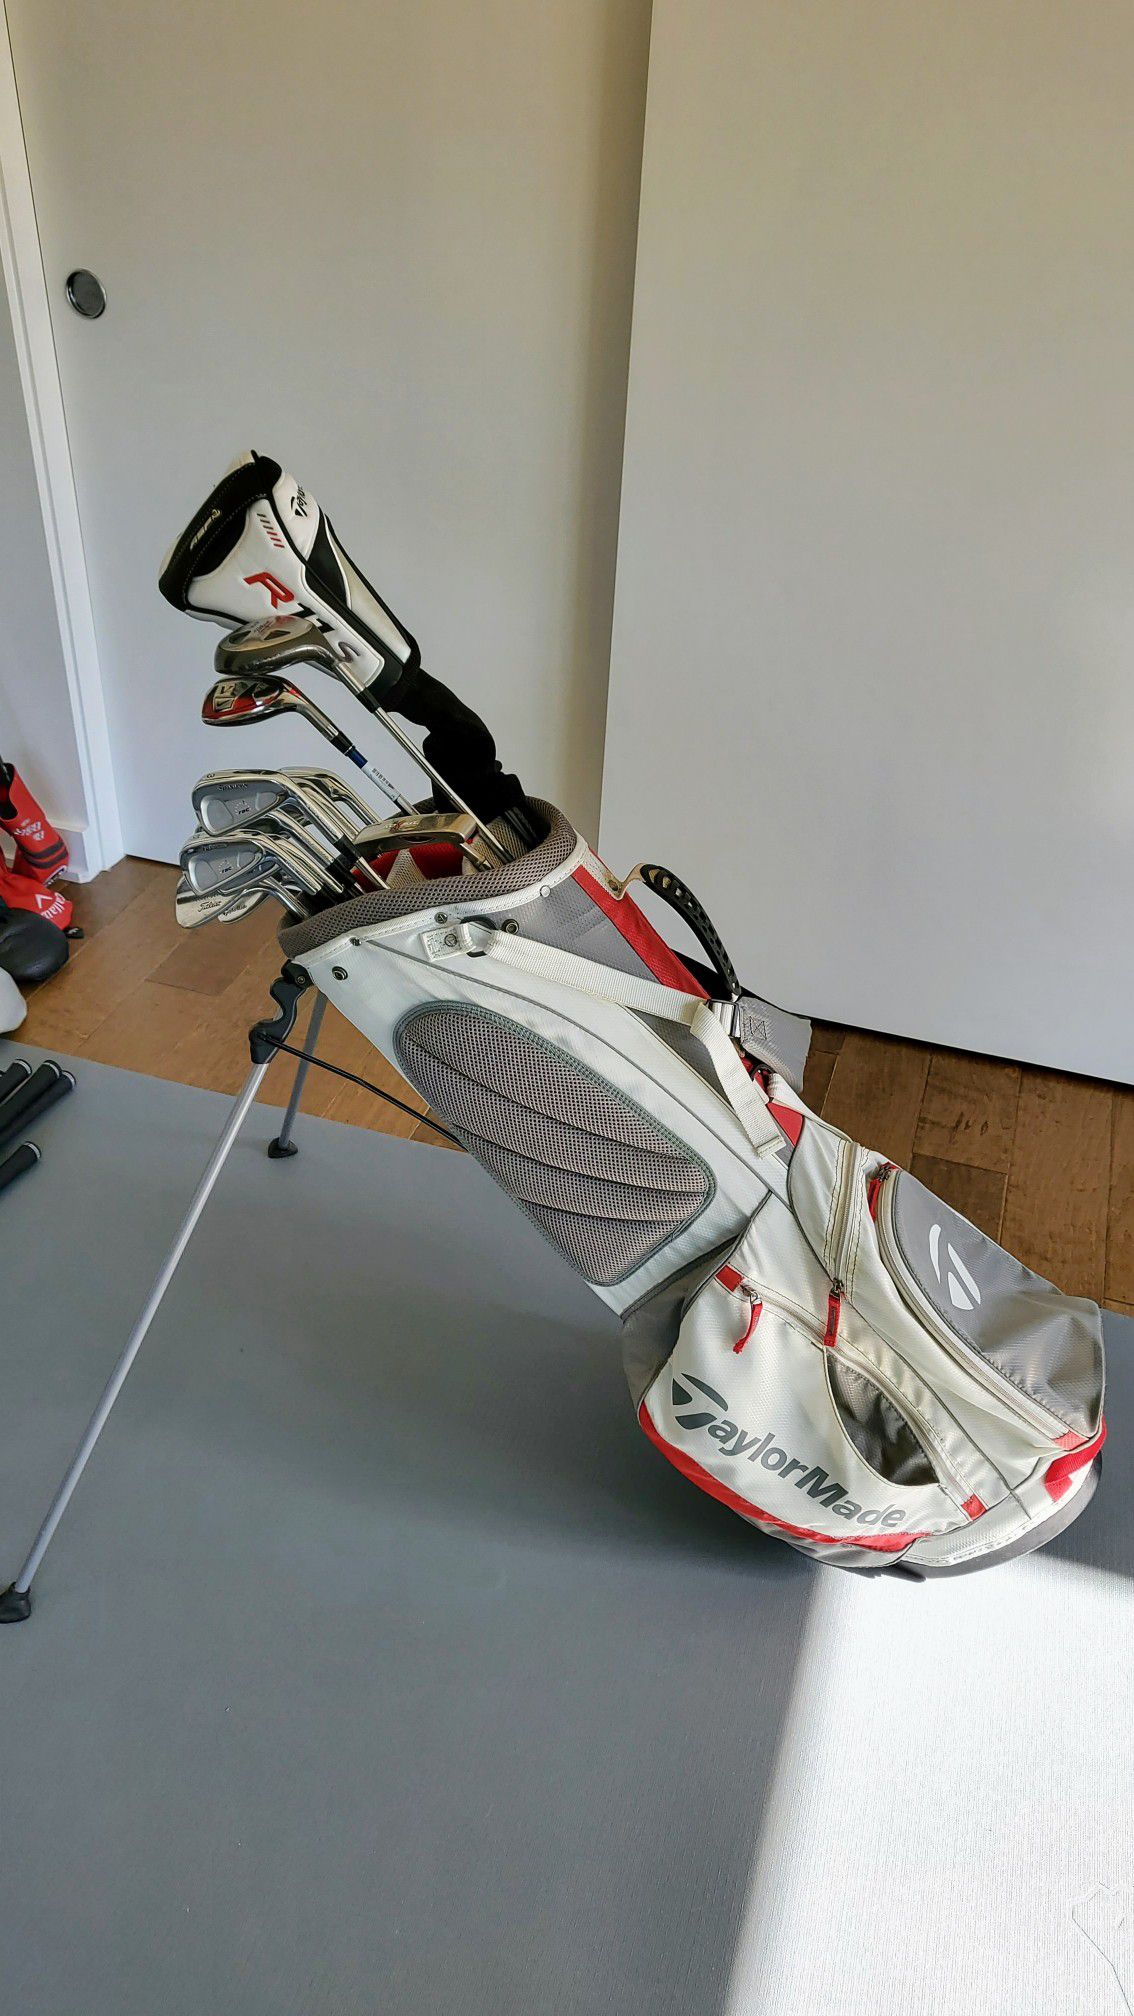 Pending - Taylormade Complete Golf Set